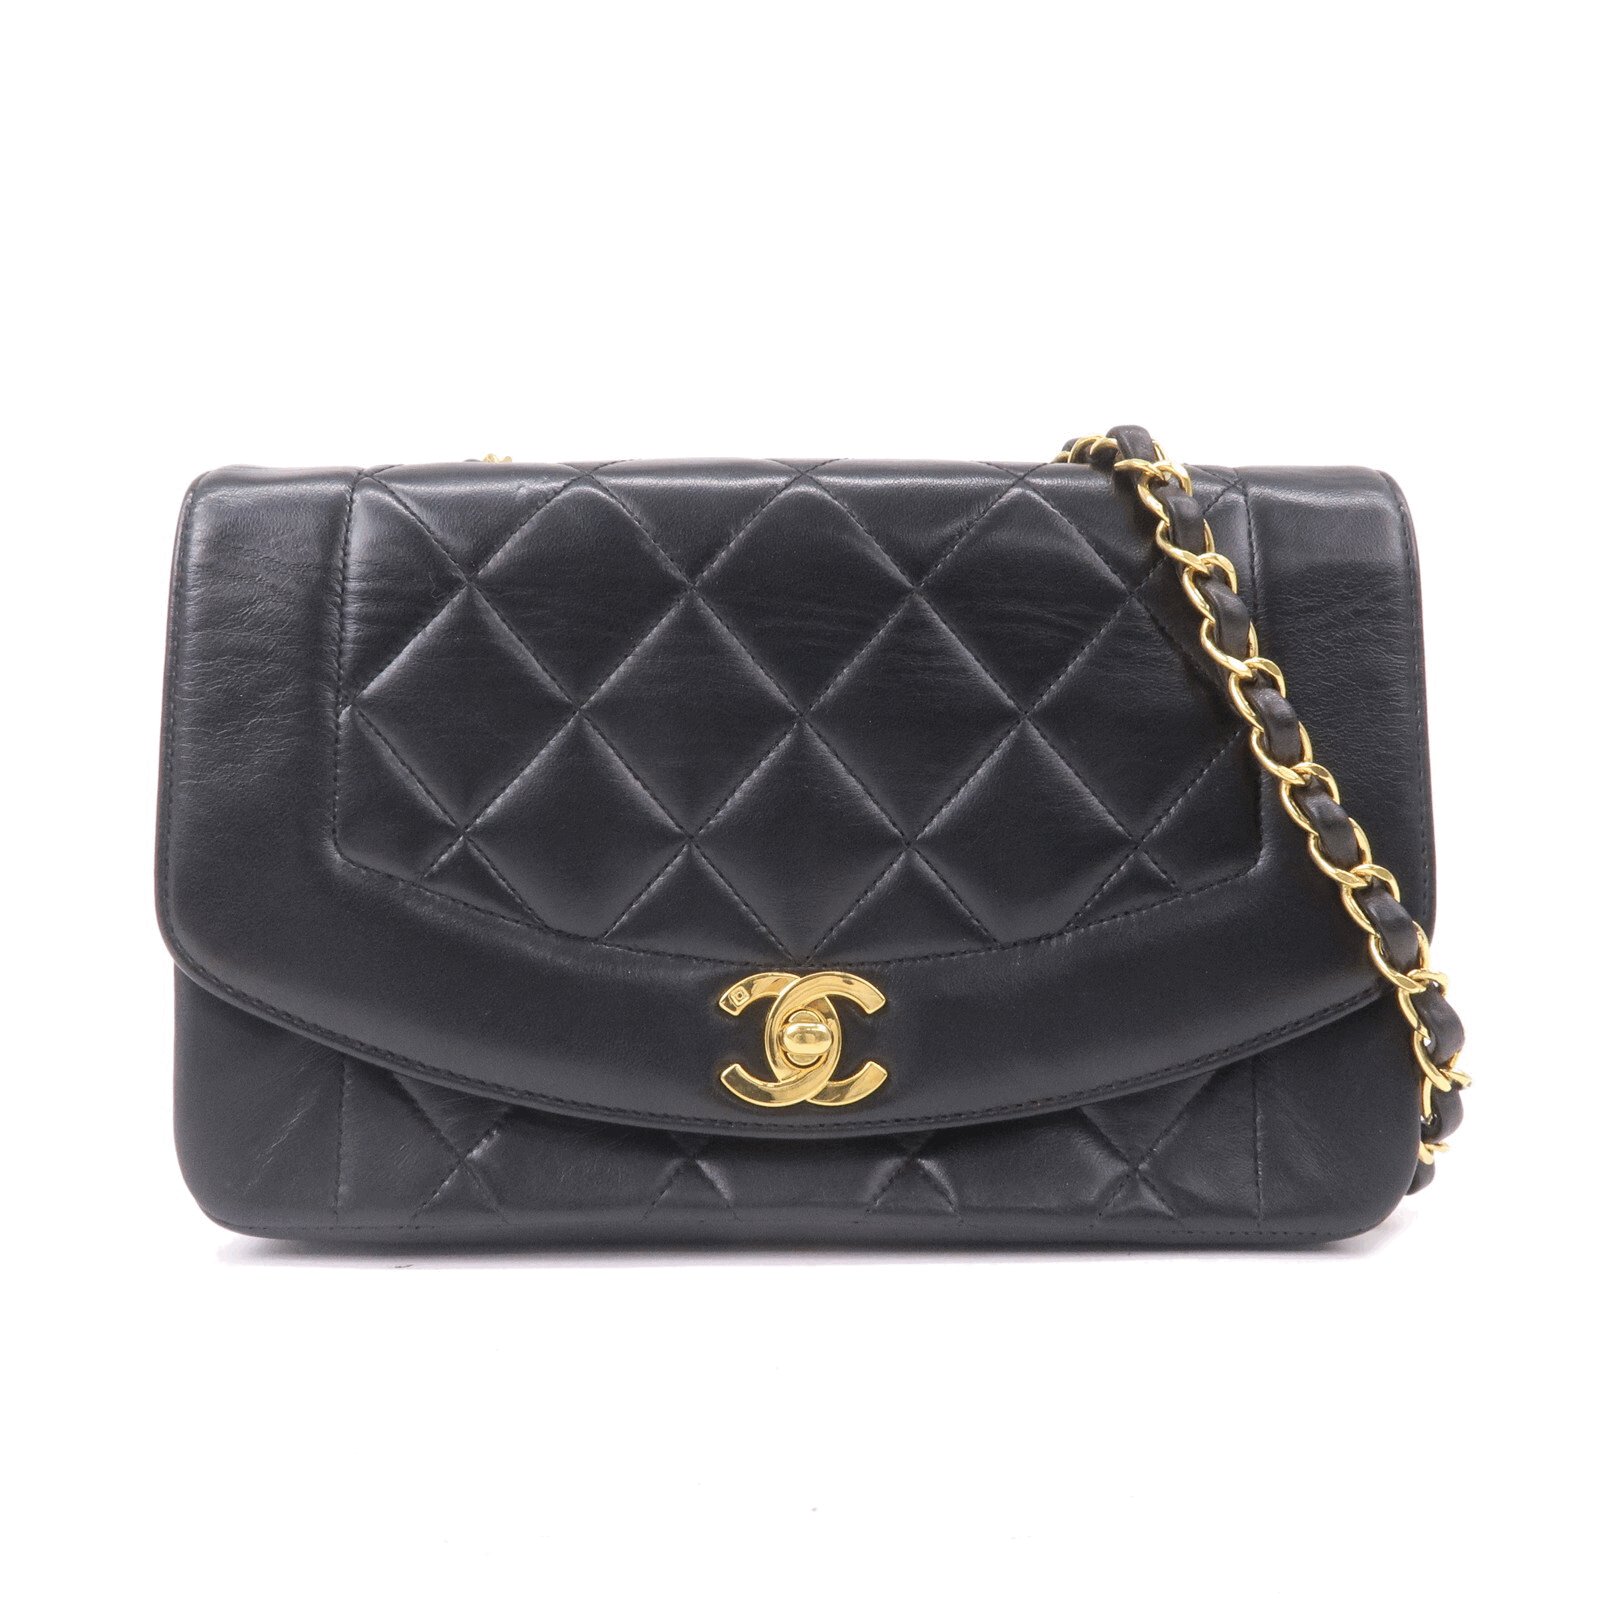 CHANEL DIANA FLAP BAG IN DEPTH REVIEW